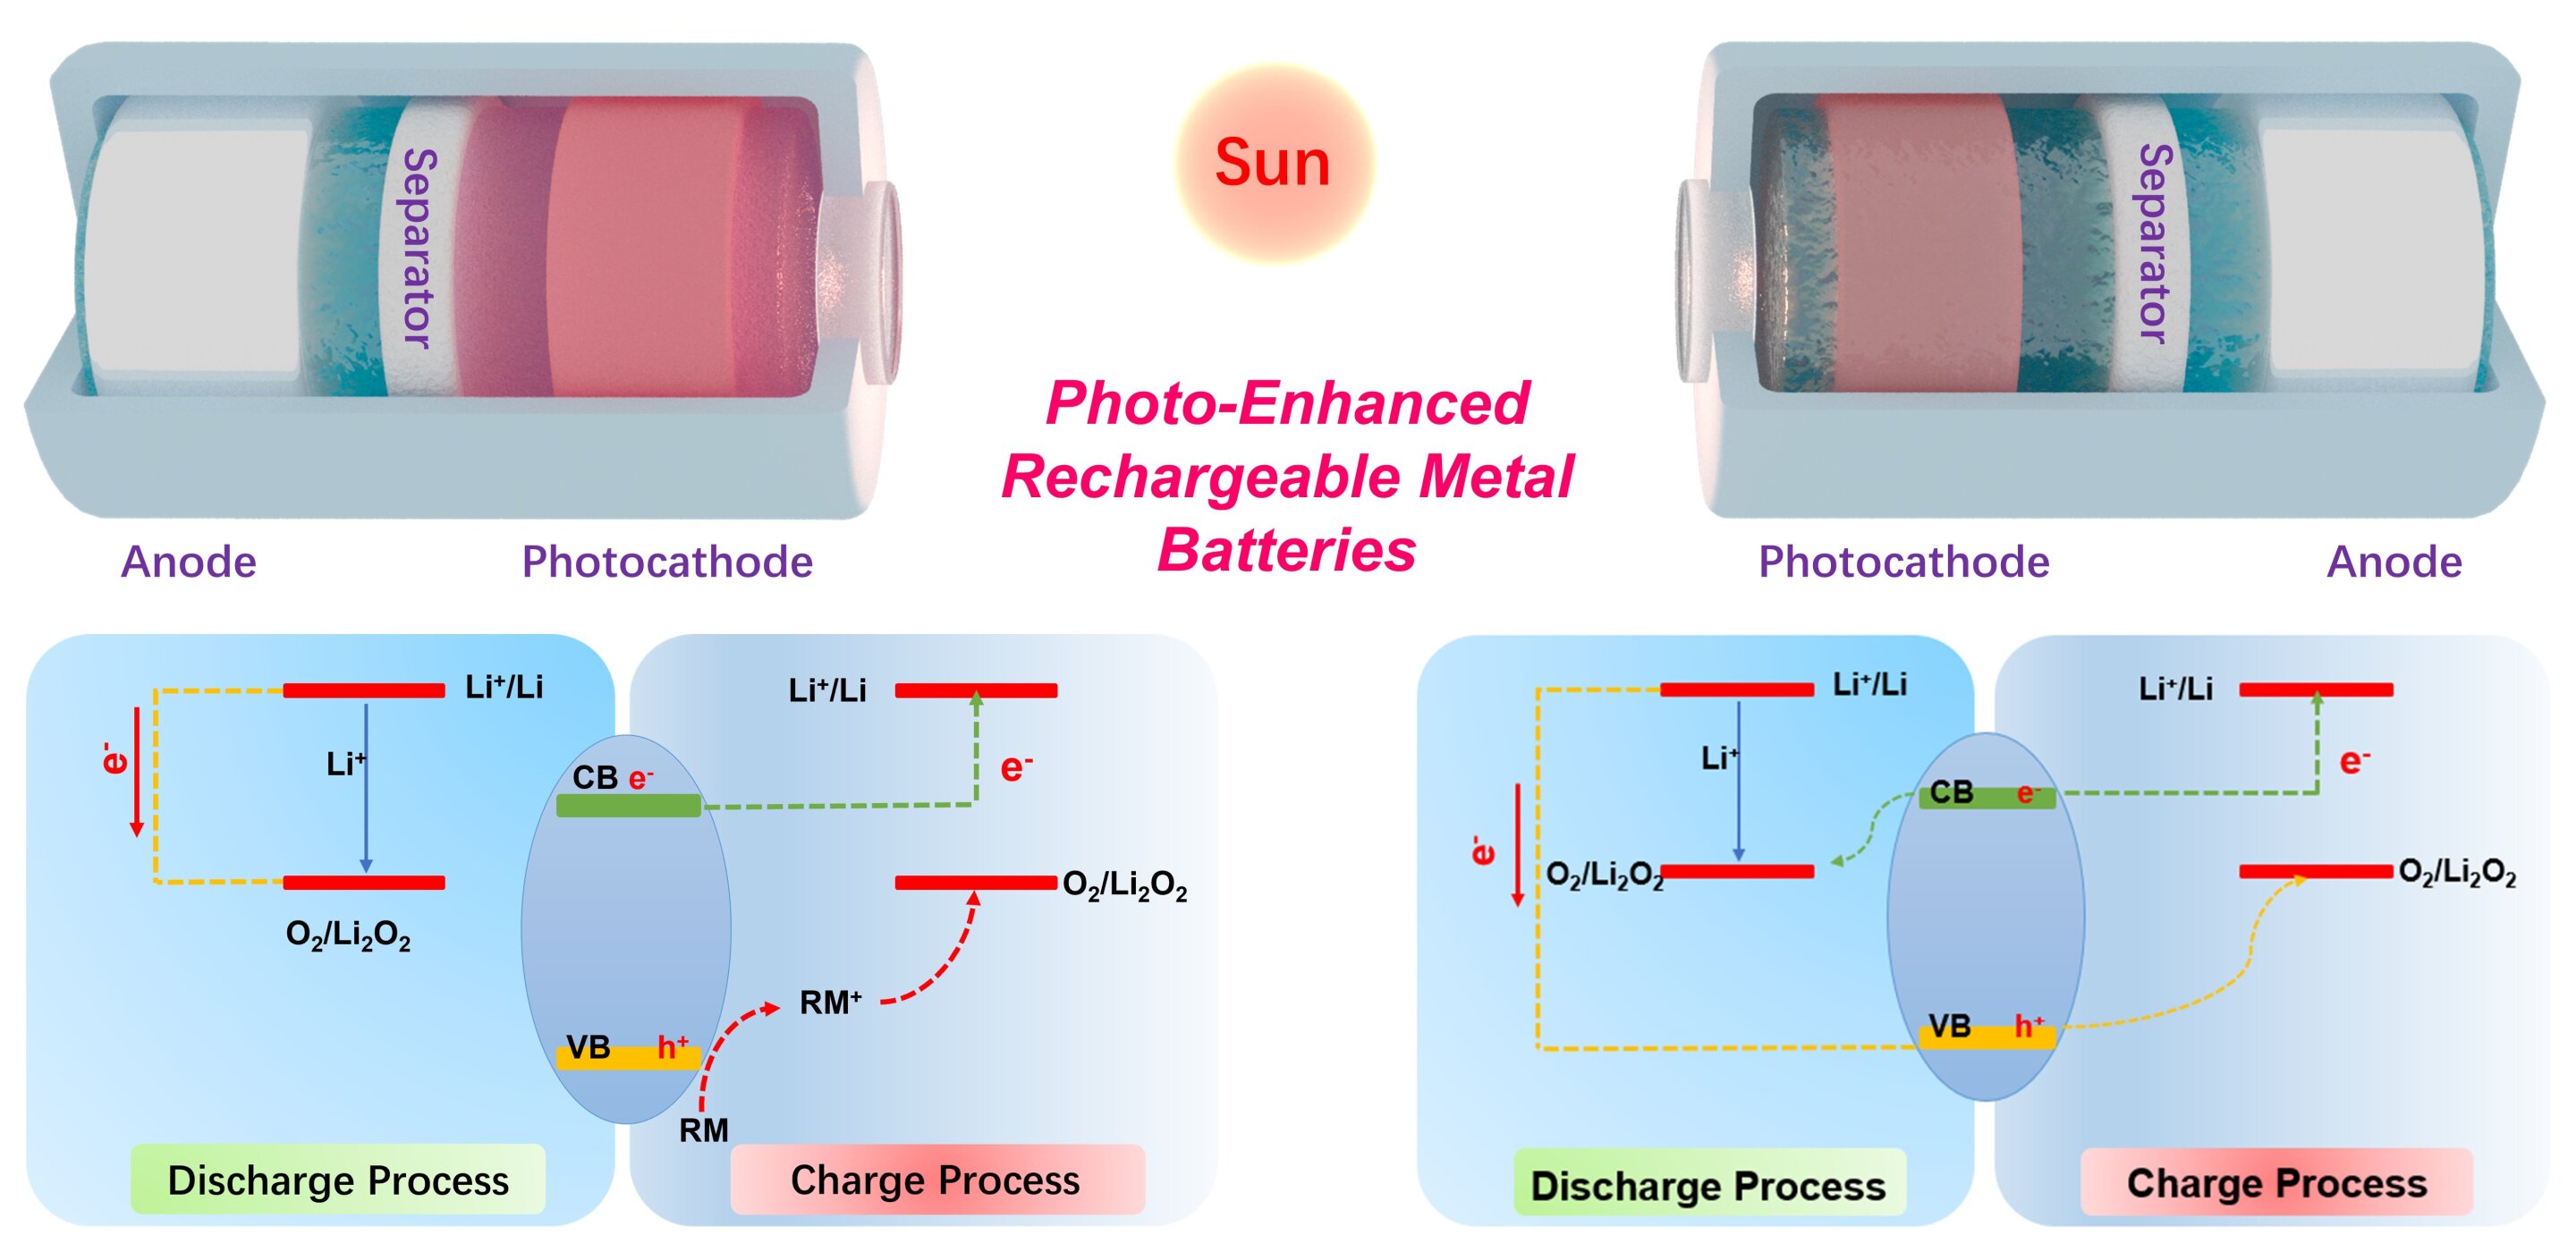 #Solving the solar energy storage problem with rechargeable batteries that can convert and store energy at once